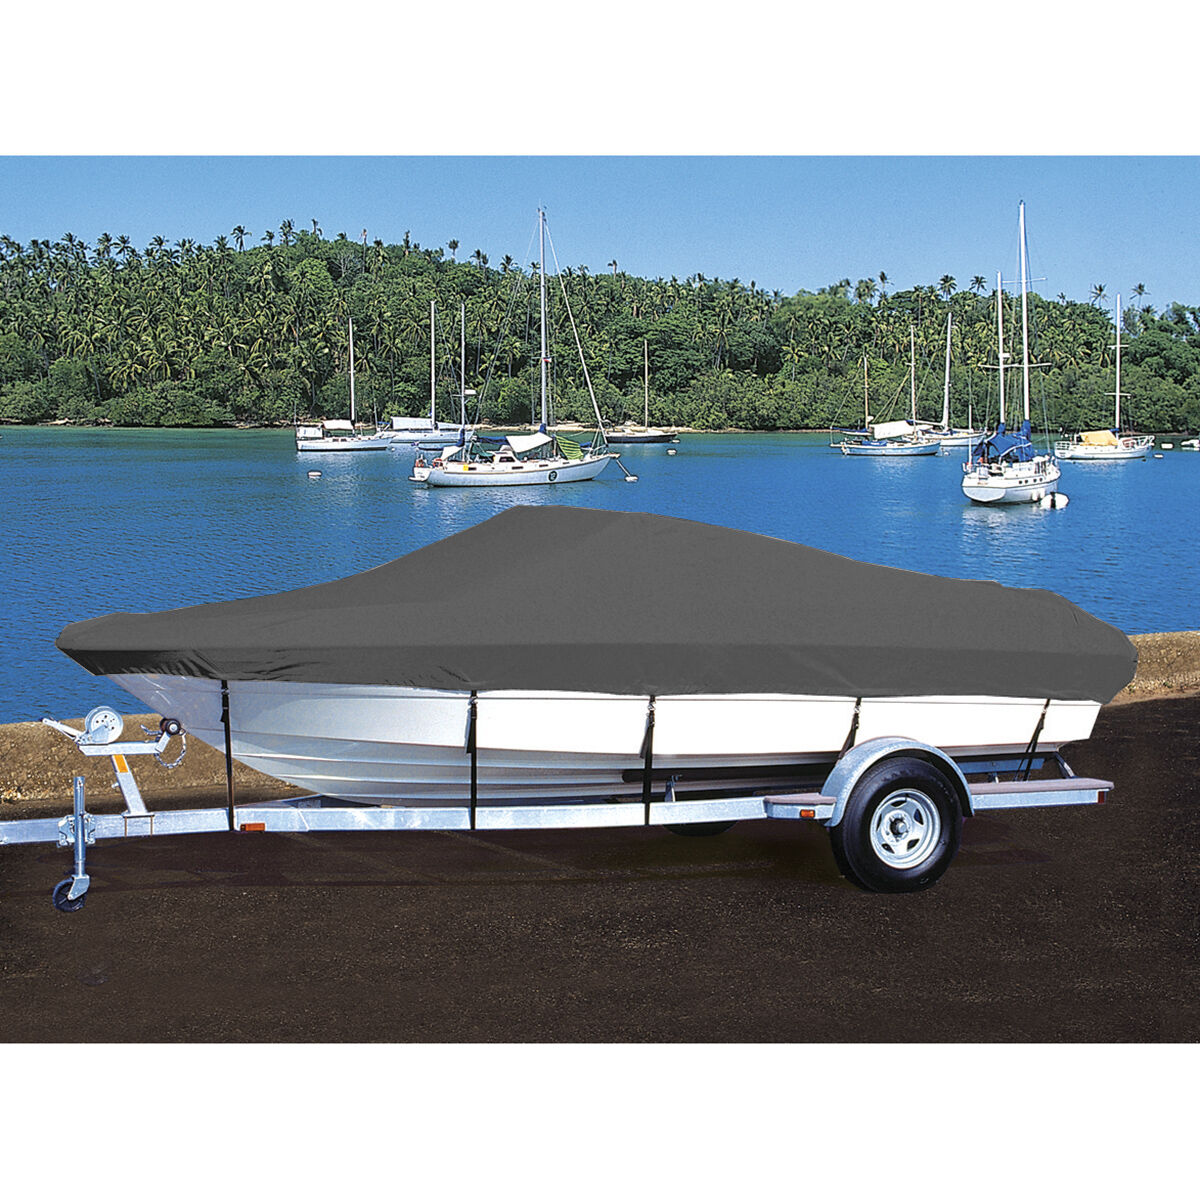 Taylor Made Trailerite Hot Shot Cover for 02-10 Whaler 180 Ventura Boat Cover in Grey Polyester